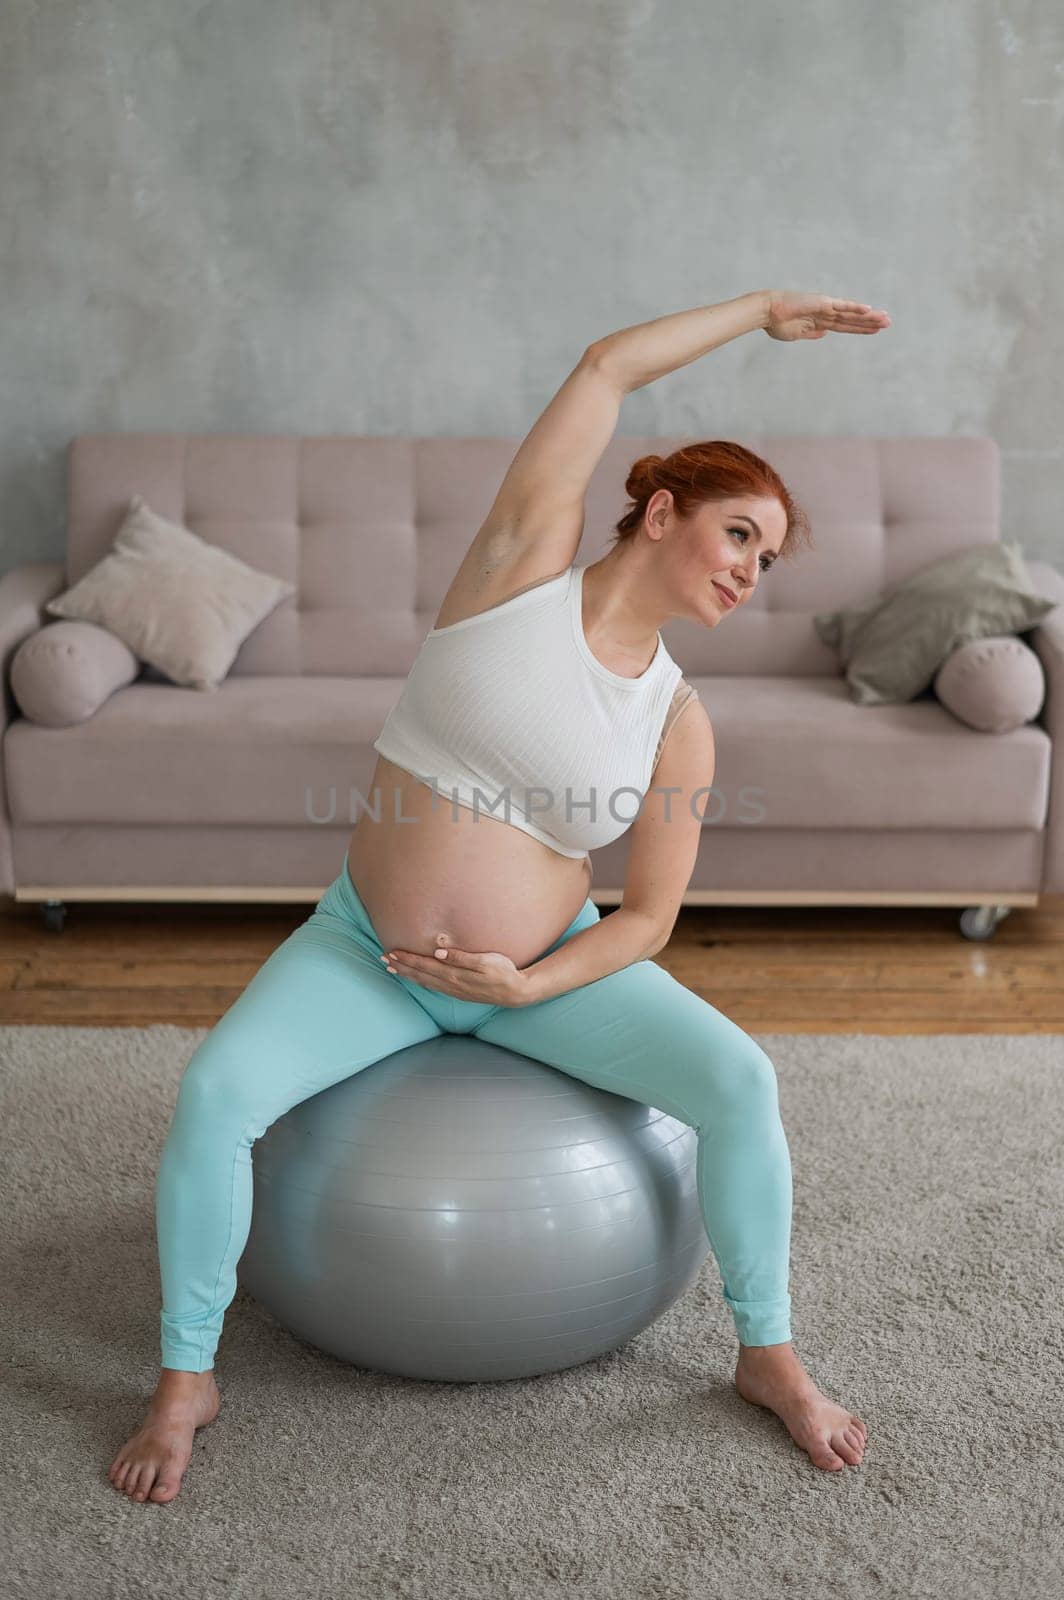 Pregnant woman doing lateral bends on a fitball at home. by mrwed54